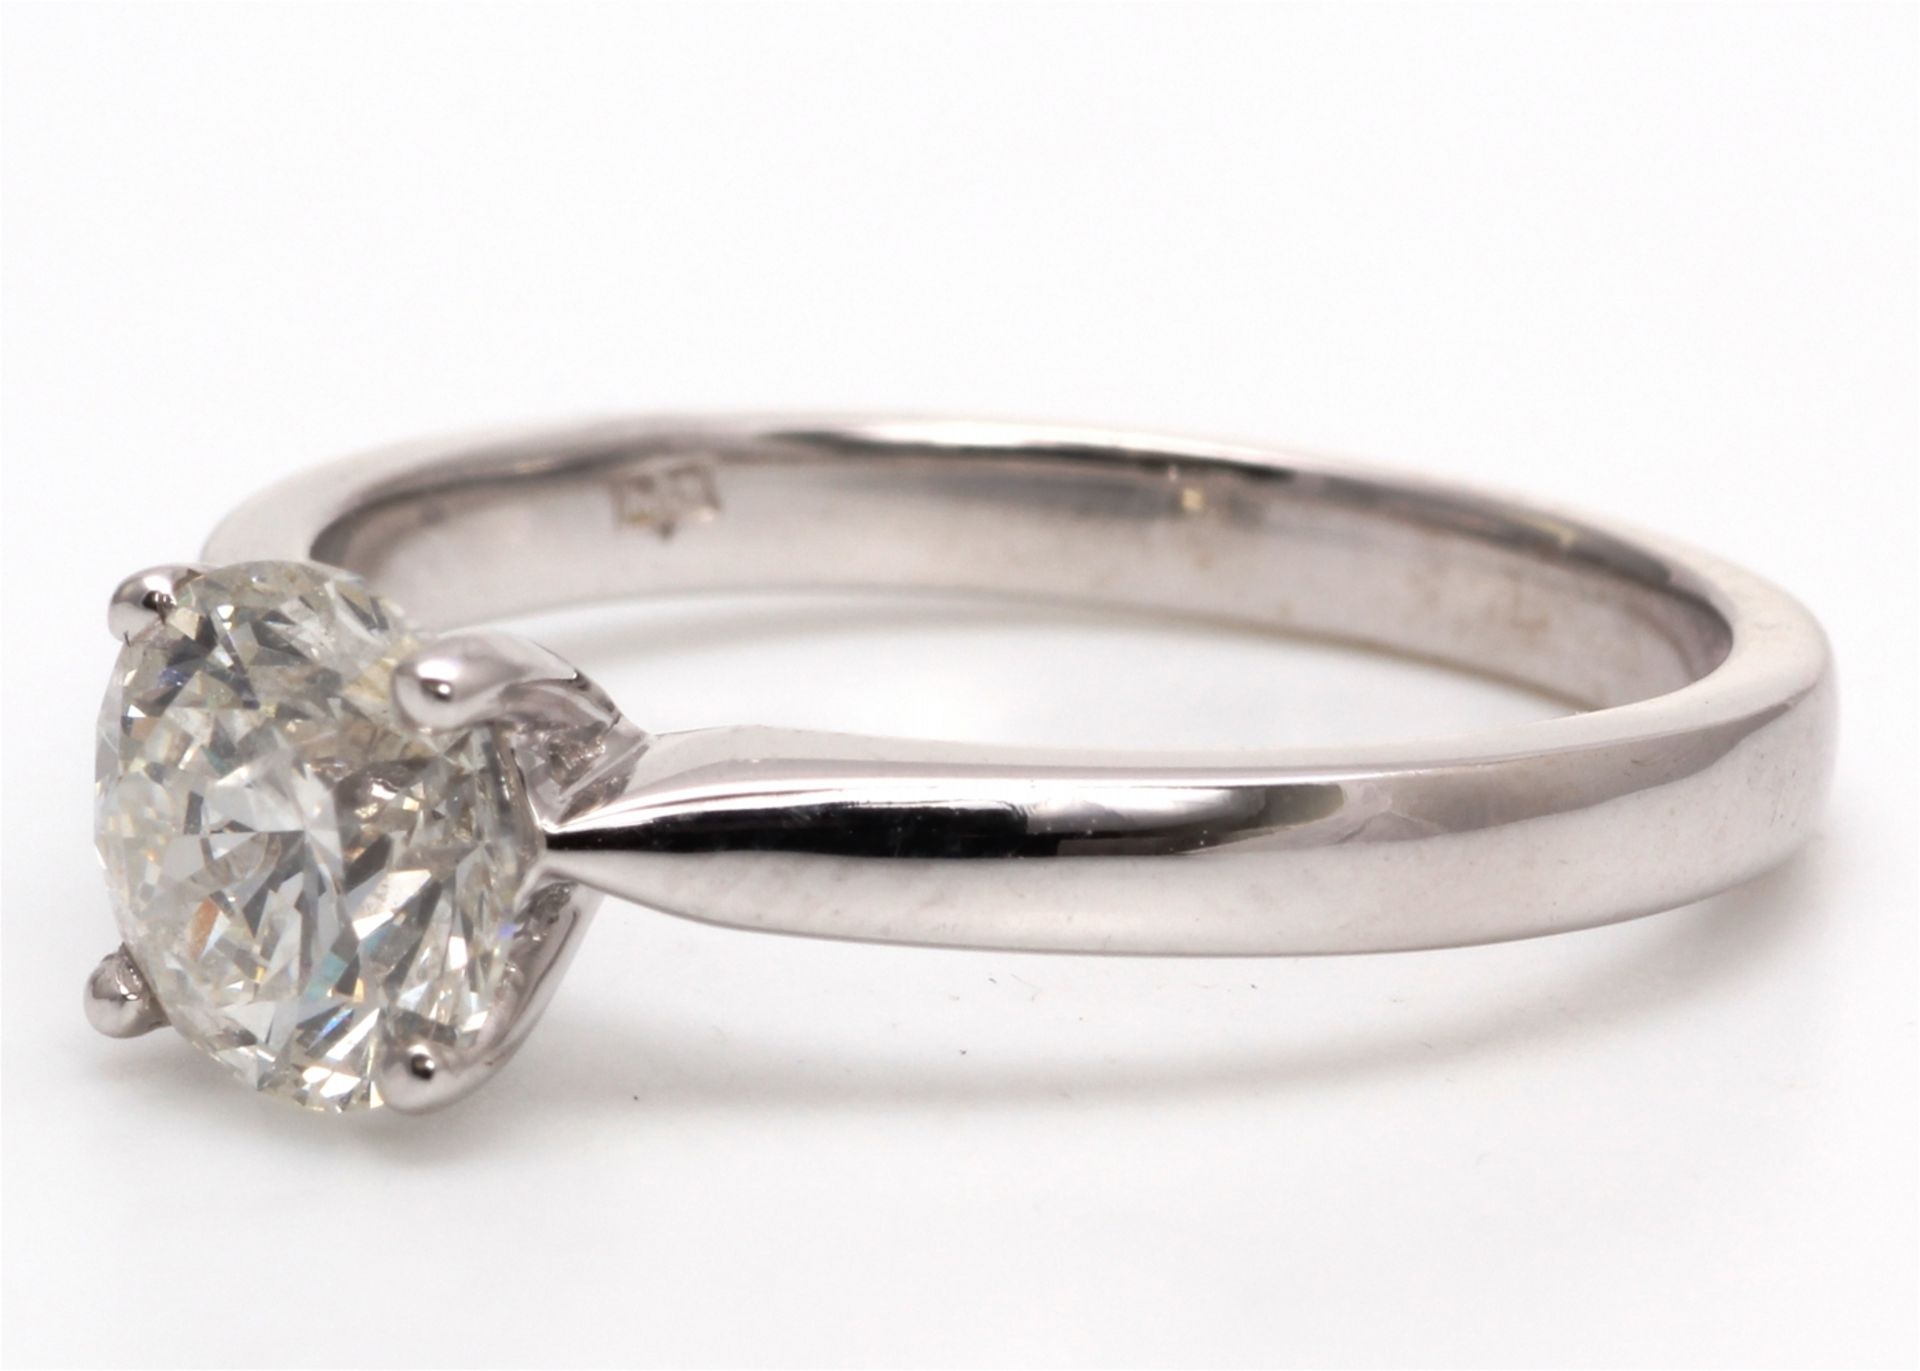 18ct White Gold Single Stone Diamond Ring 1.05 Carats - Valued by AGI £20,590.12 - A gorgeous - Image 2 of 4